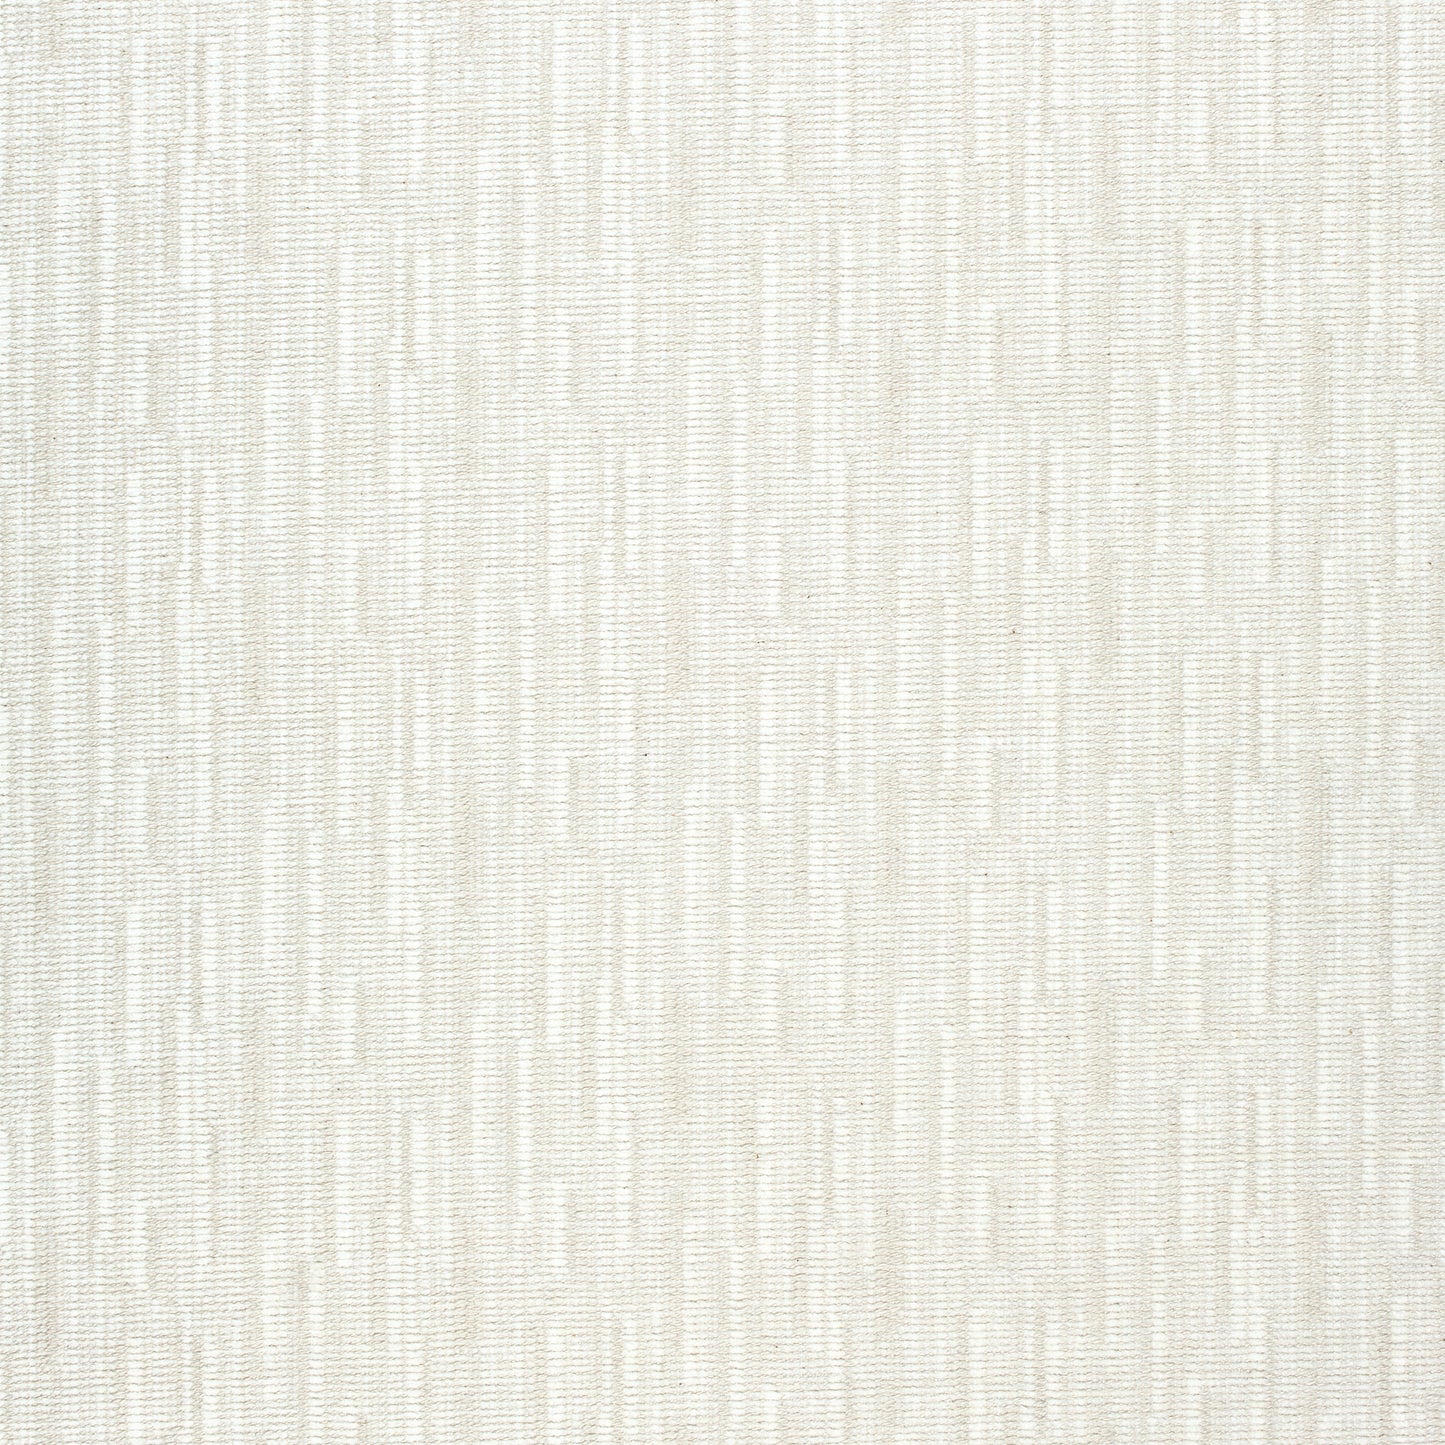 Purchase Thibaut Fabric Item# W789119 pattern name Dominic color Almond